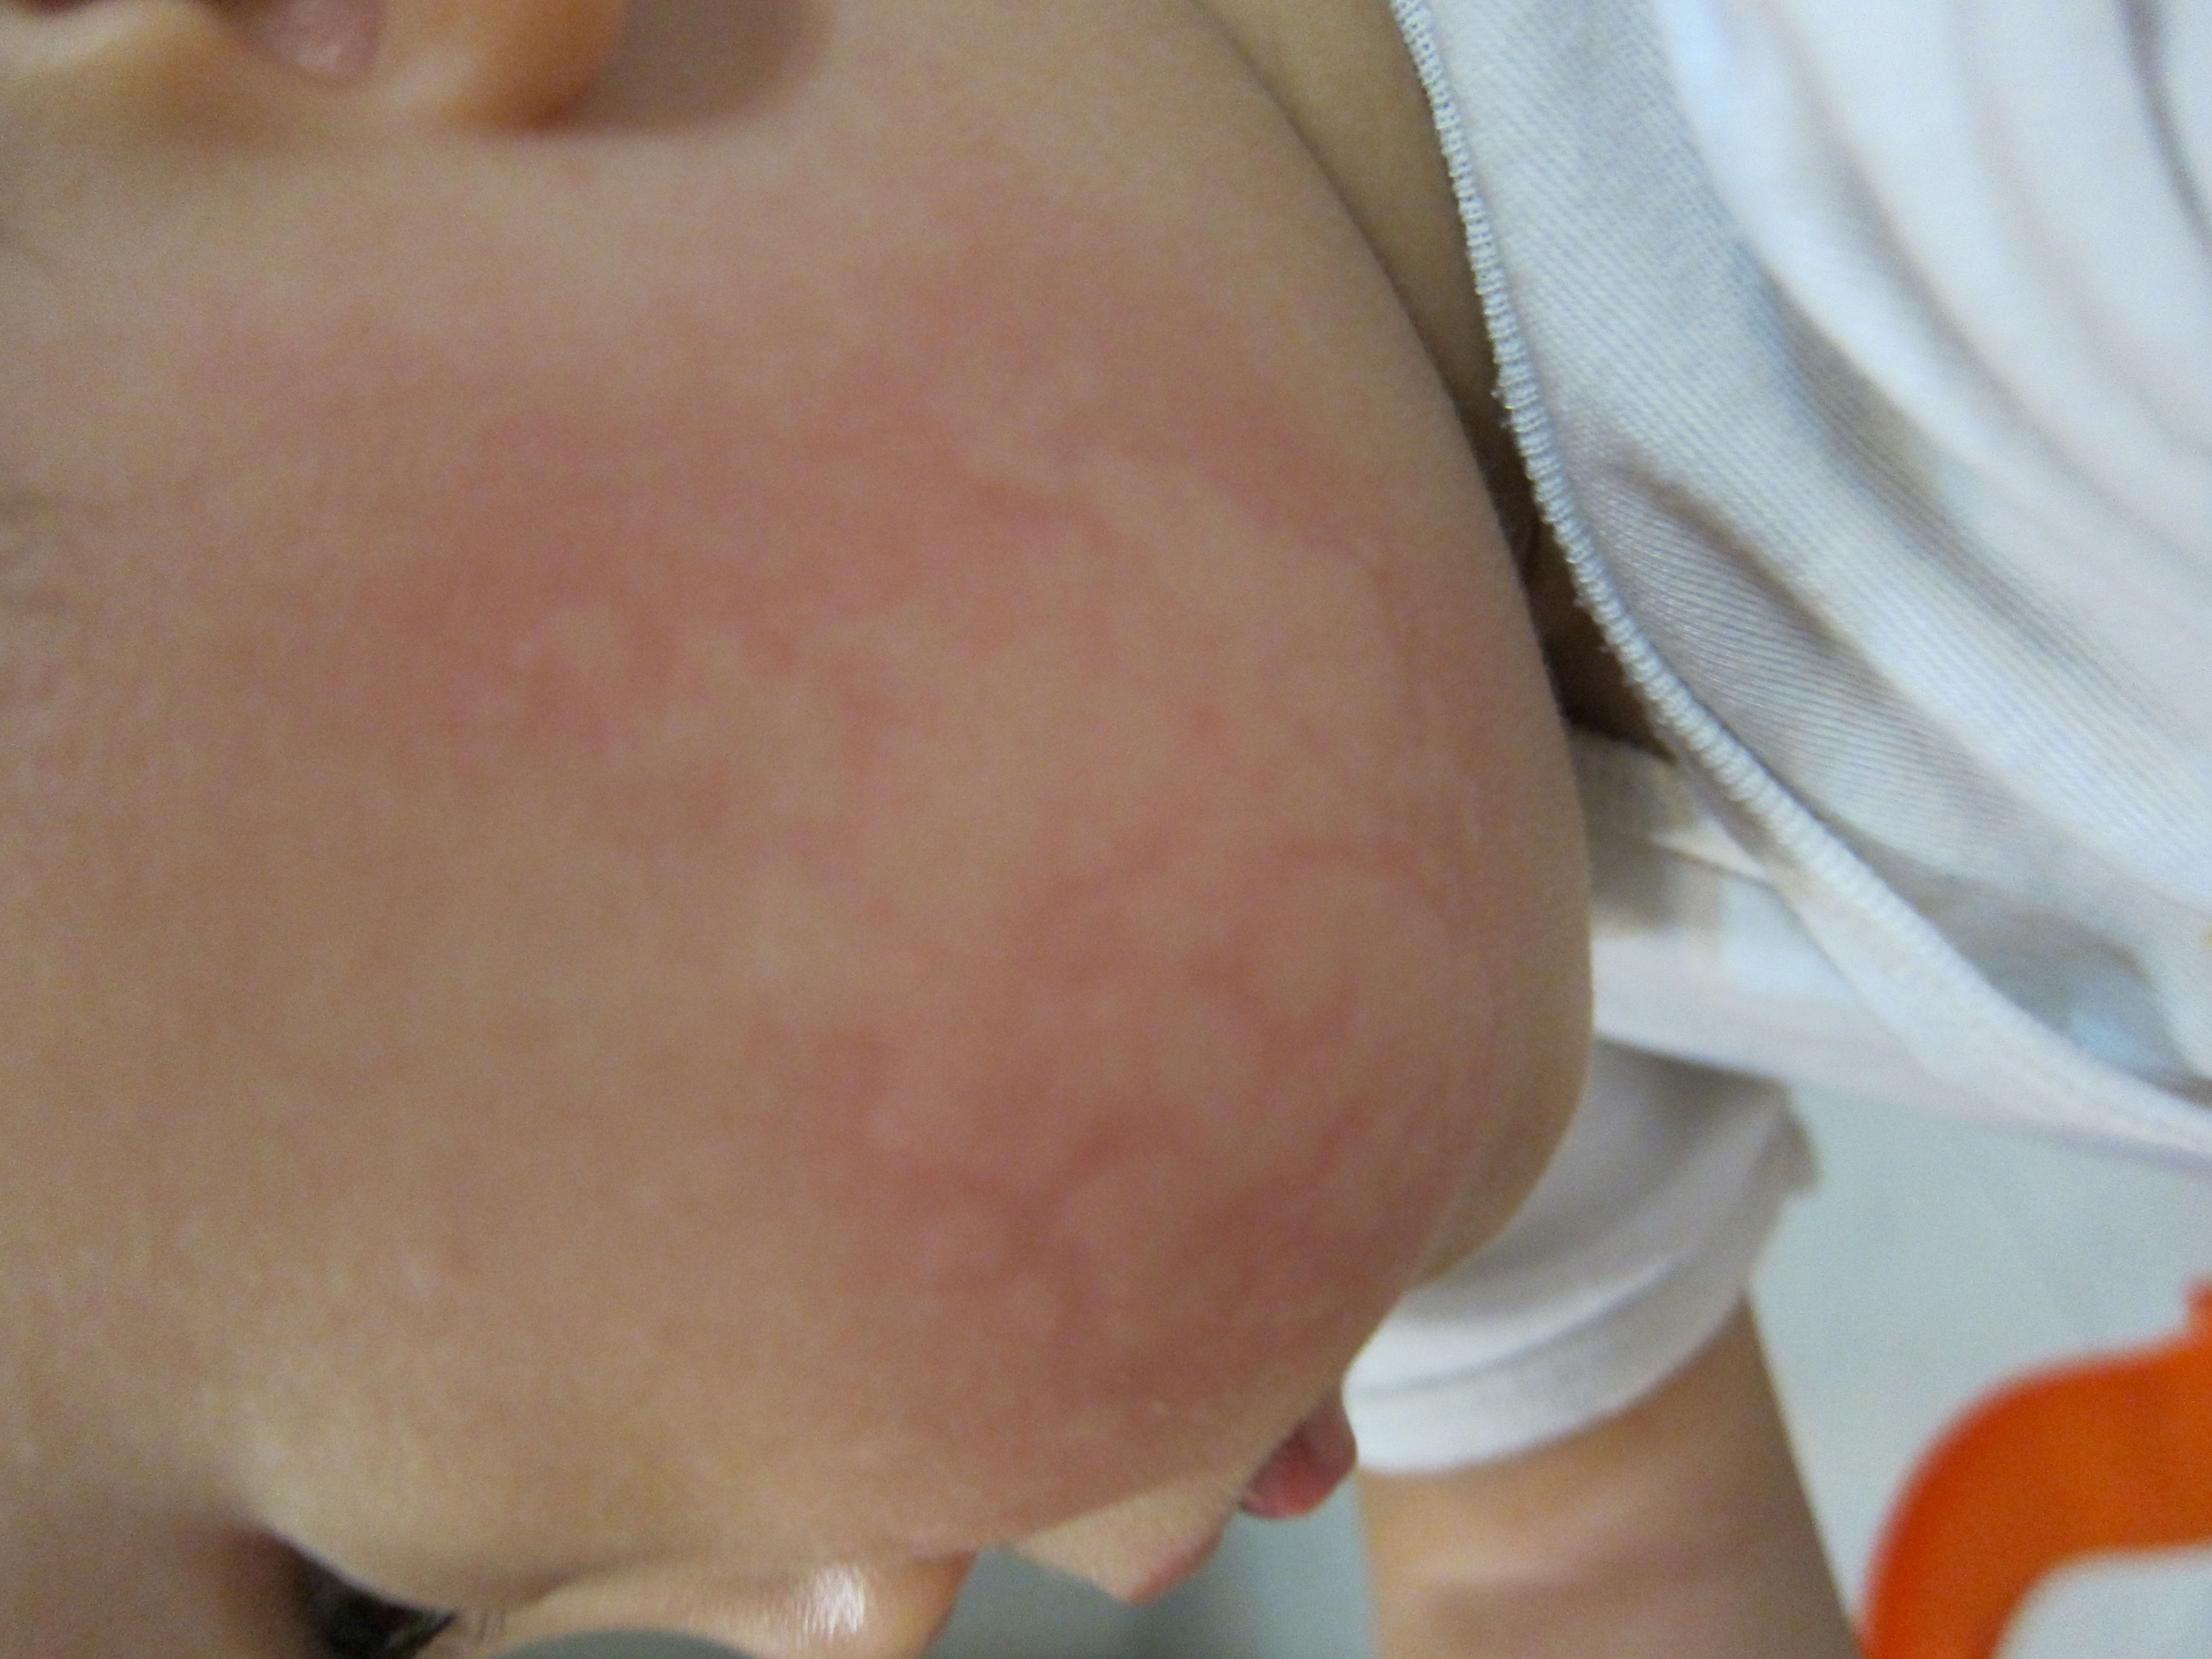 Pictures of Allergic Skin Diseases and Problems - Eczema